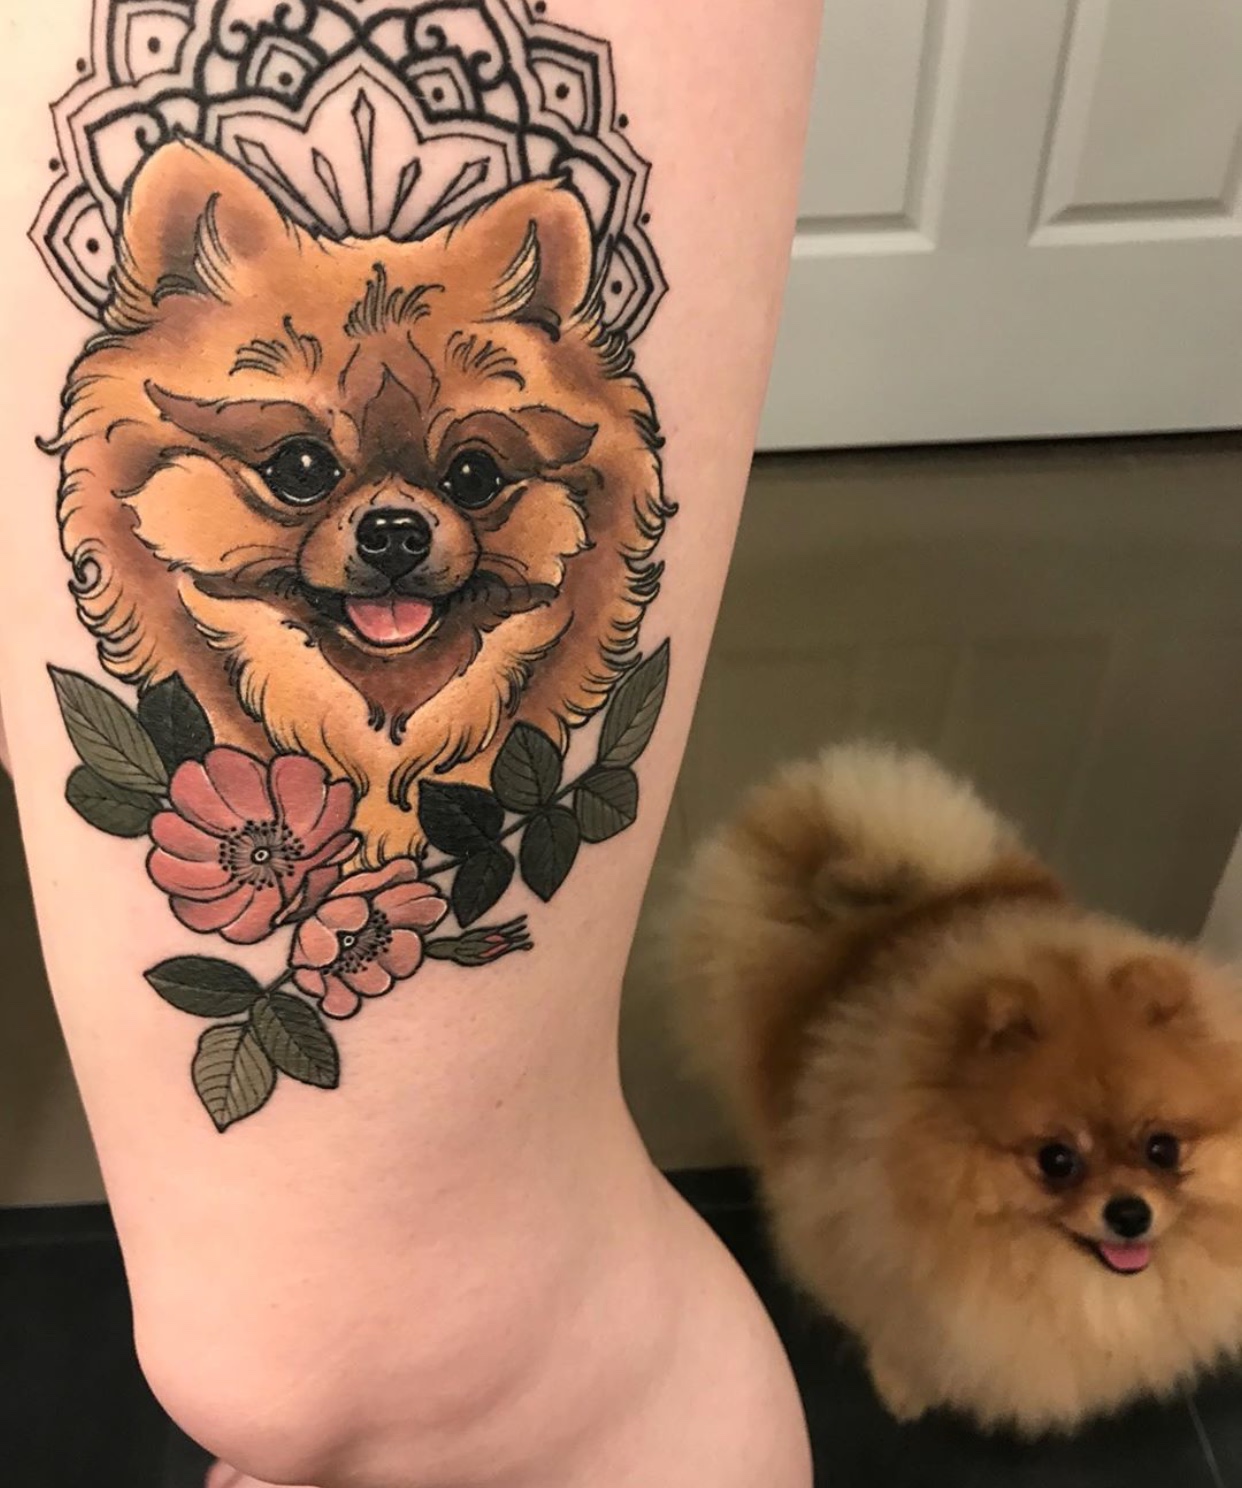 tan colored Pomeranian with flowers and mandala background tattoo on the thigh